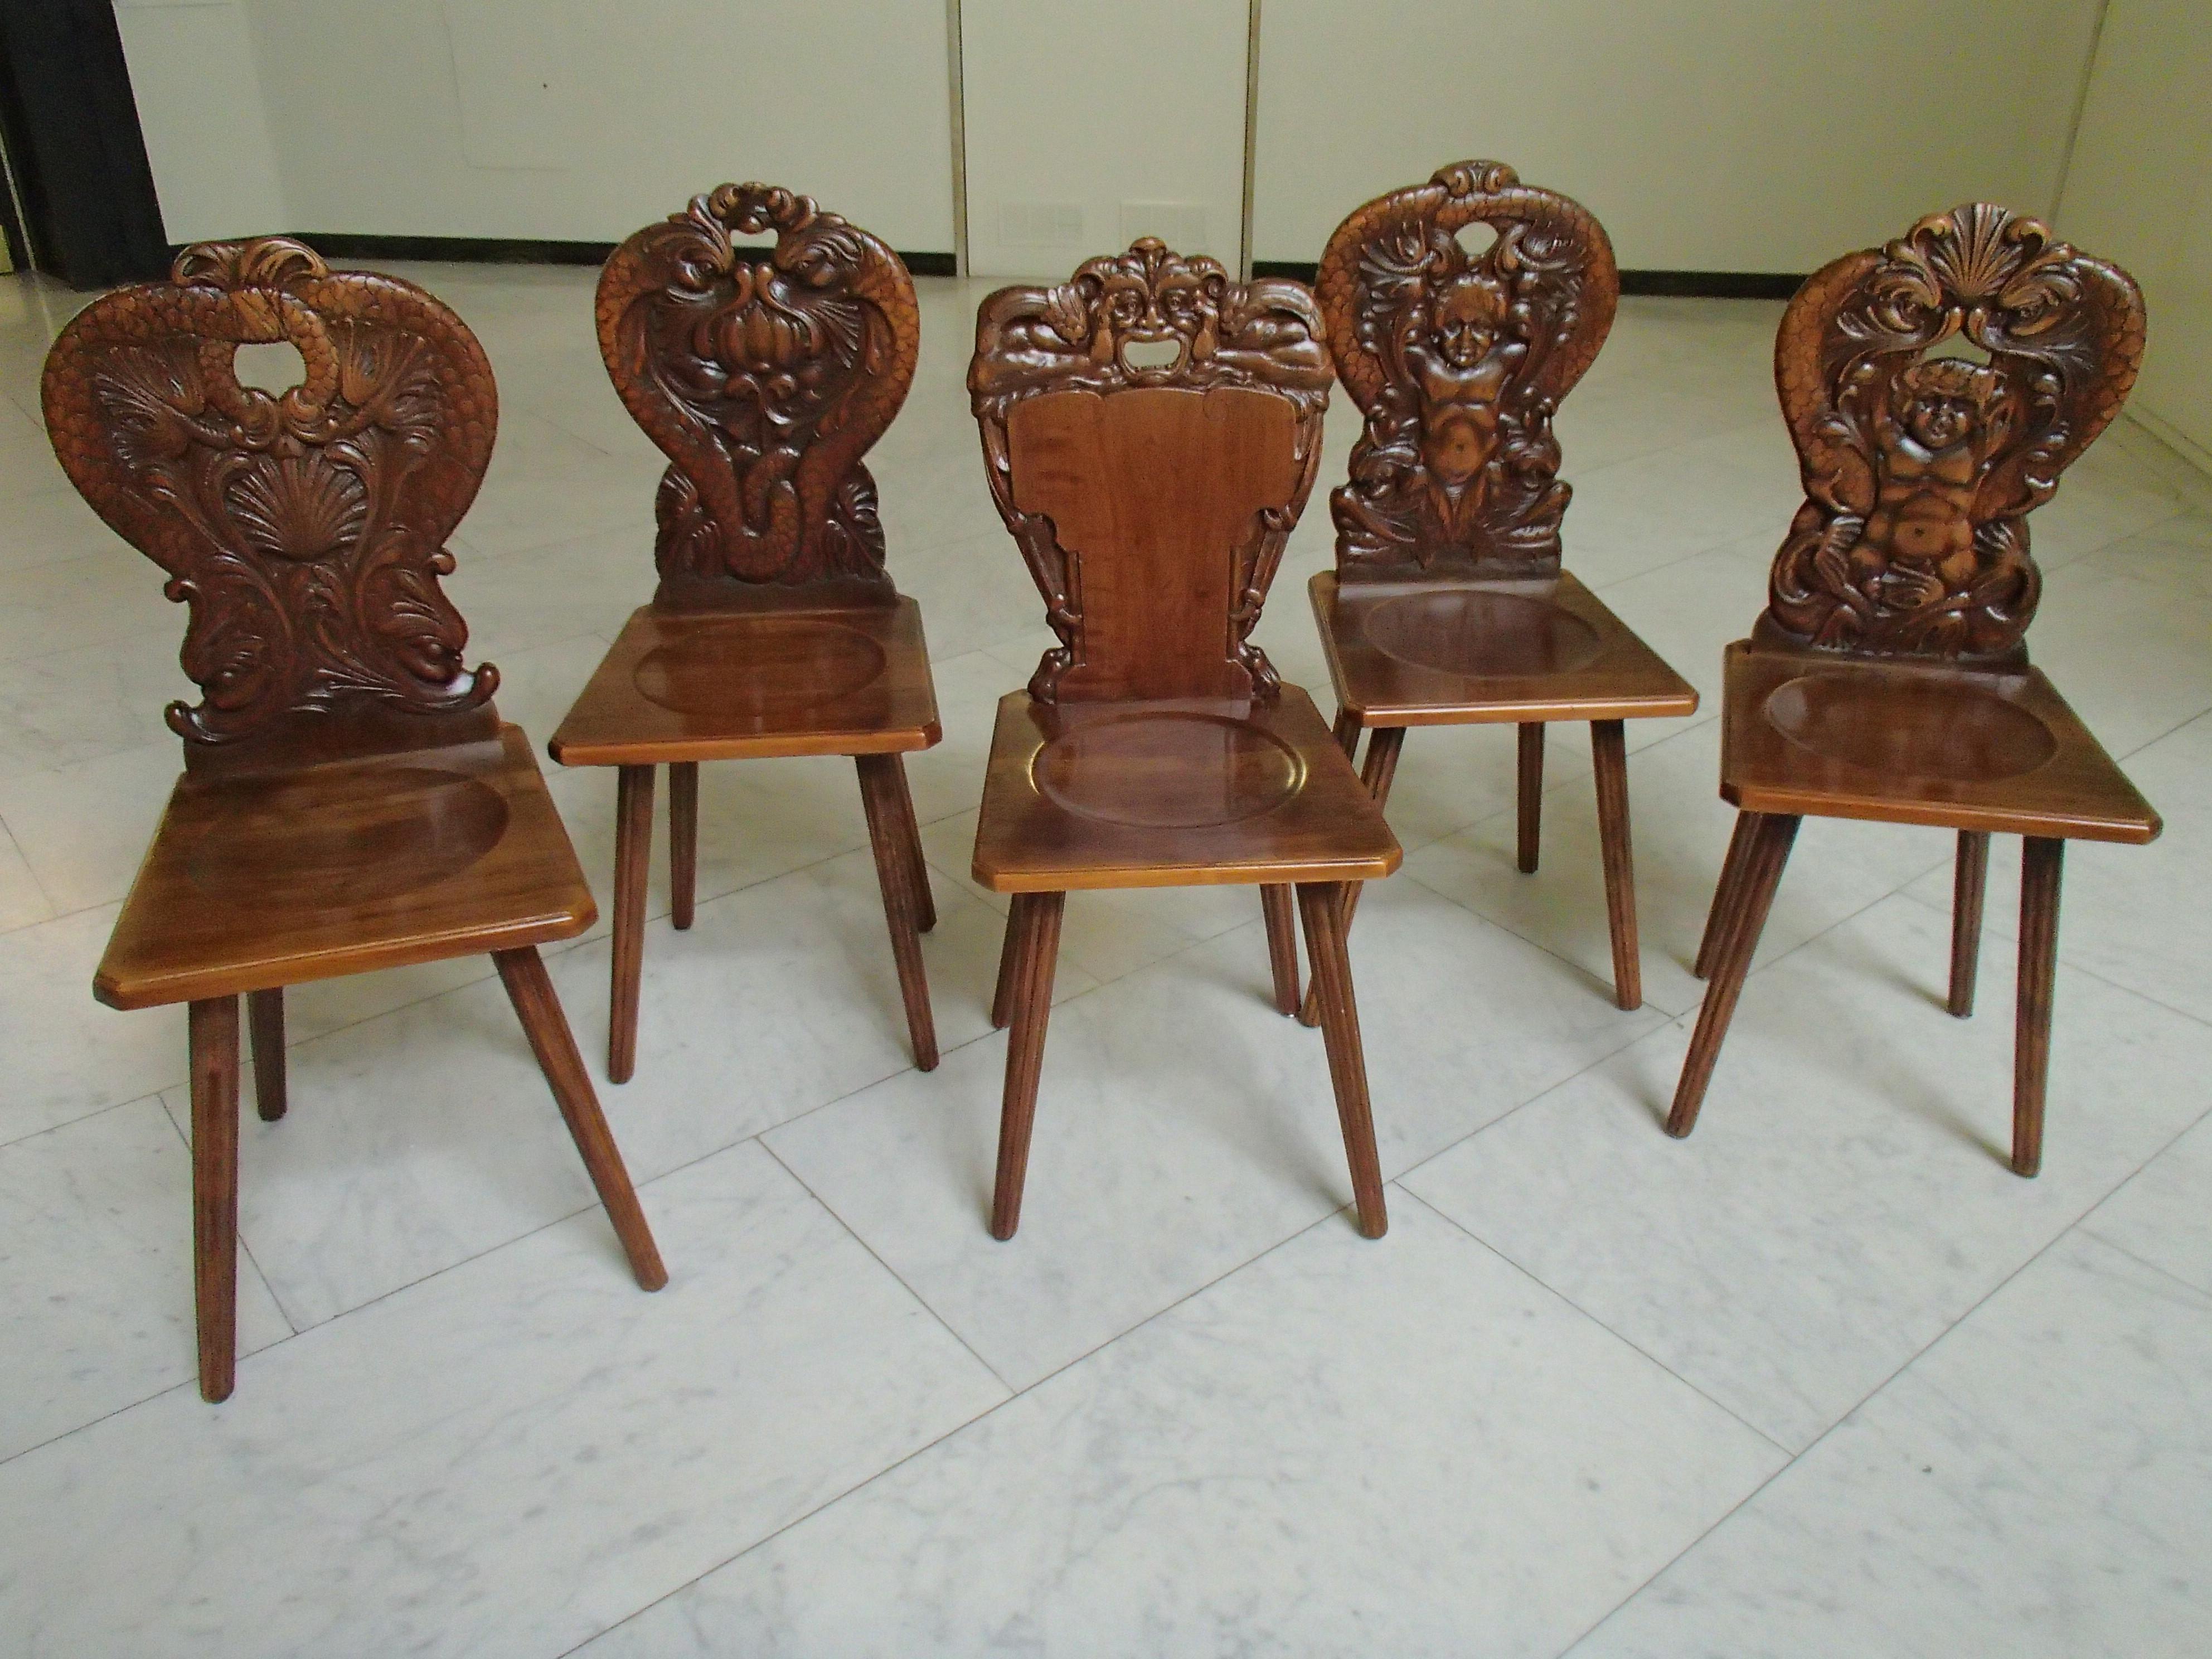 Pair of Brutalist Wooden Chairs Carved with Fabulous Creatures - Dragons 11